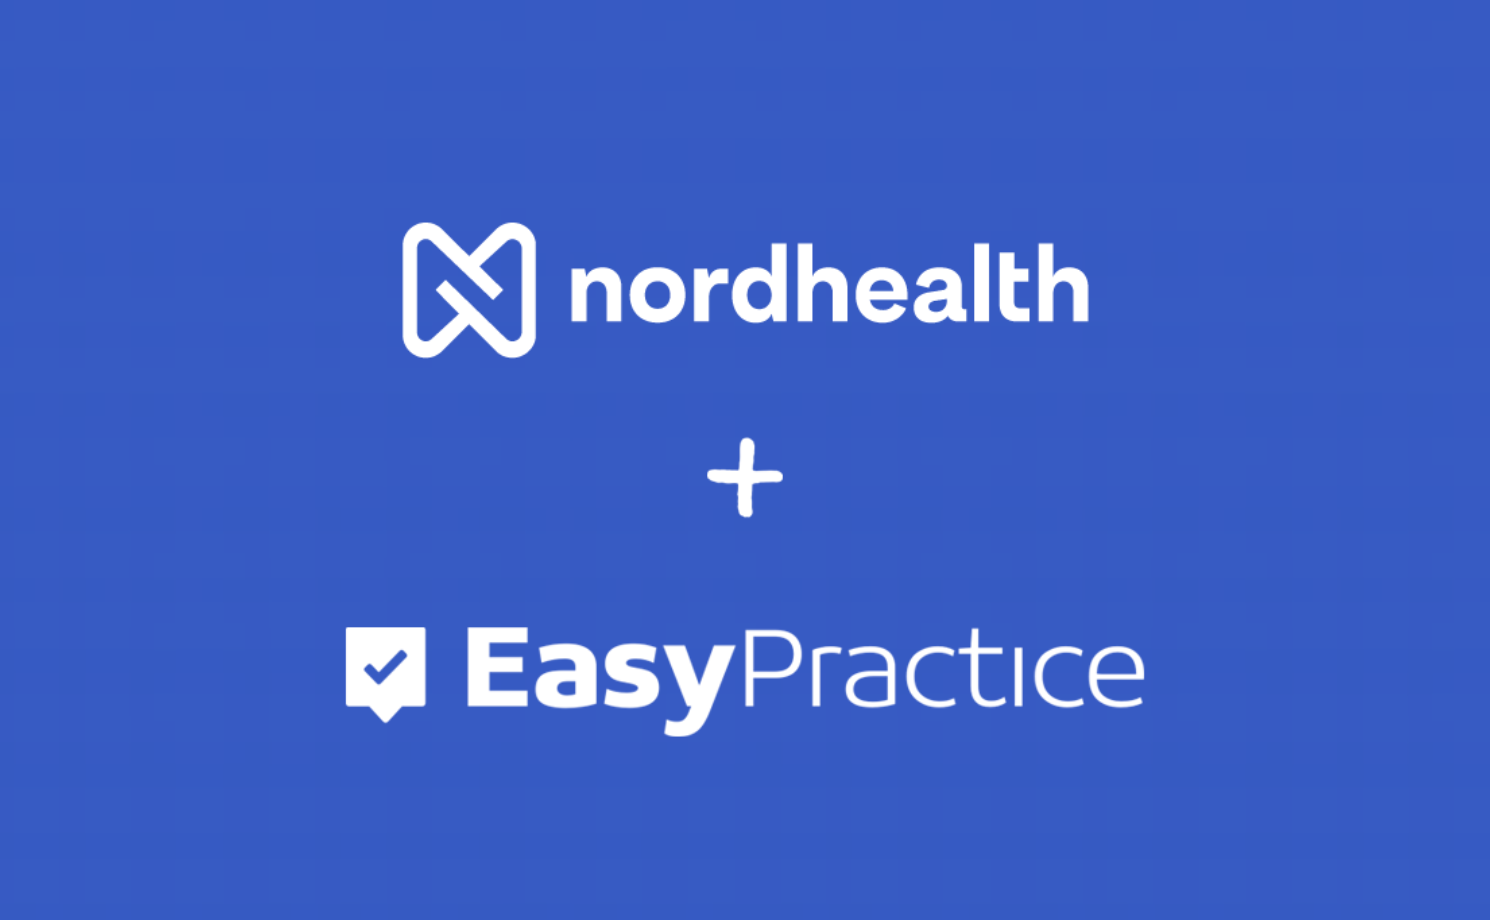 Nordhealth and EasyPractice